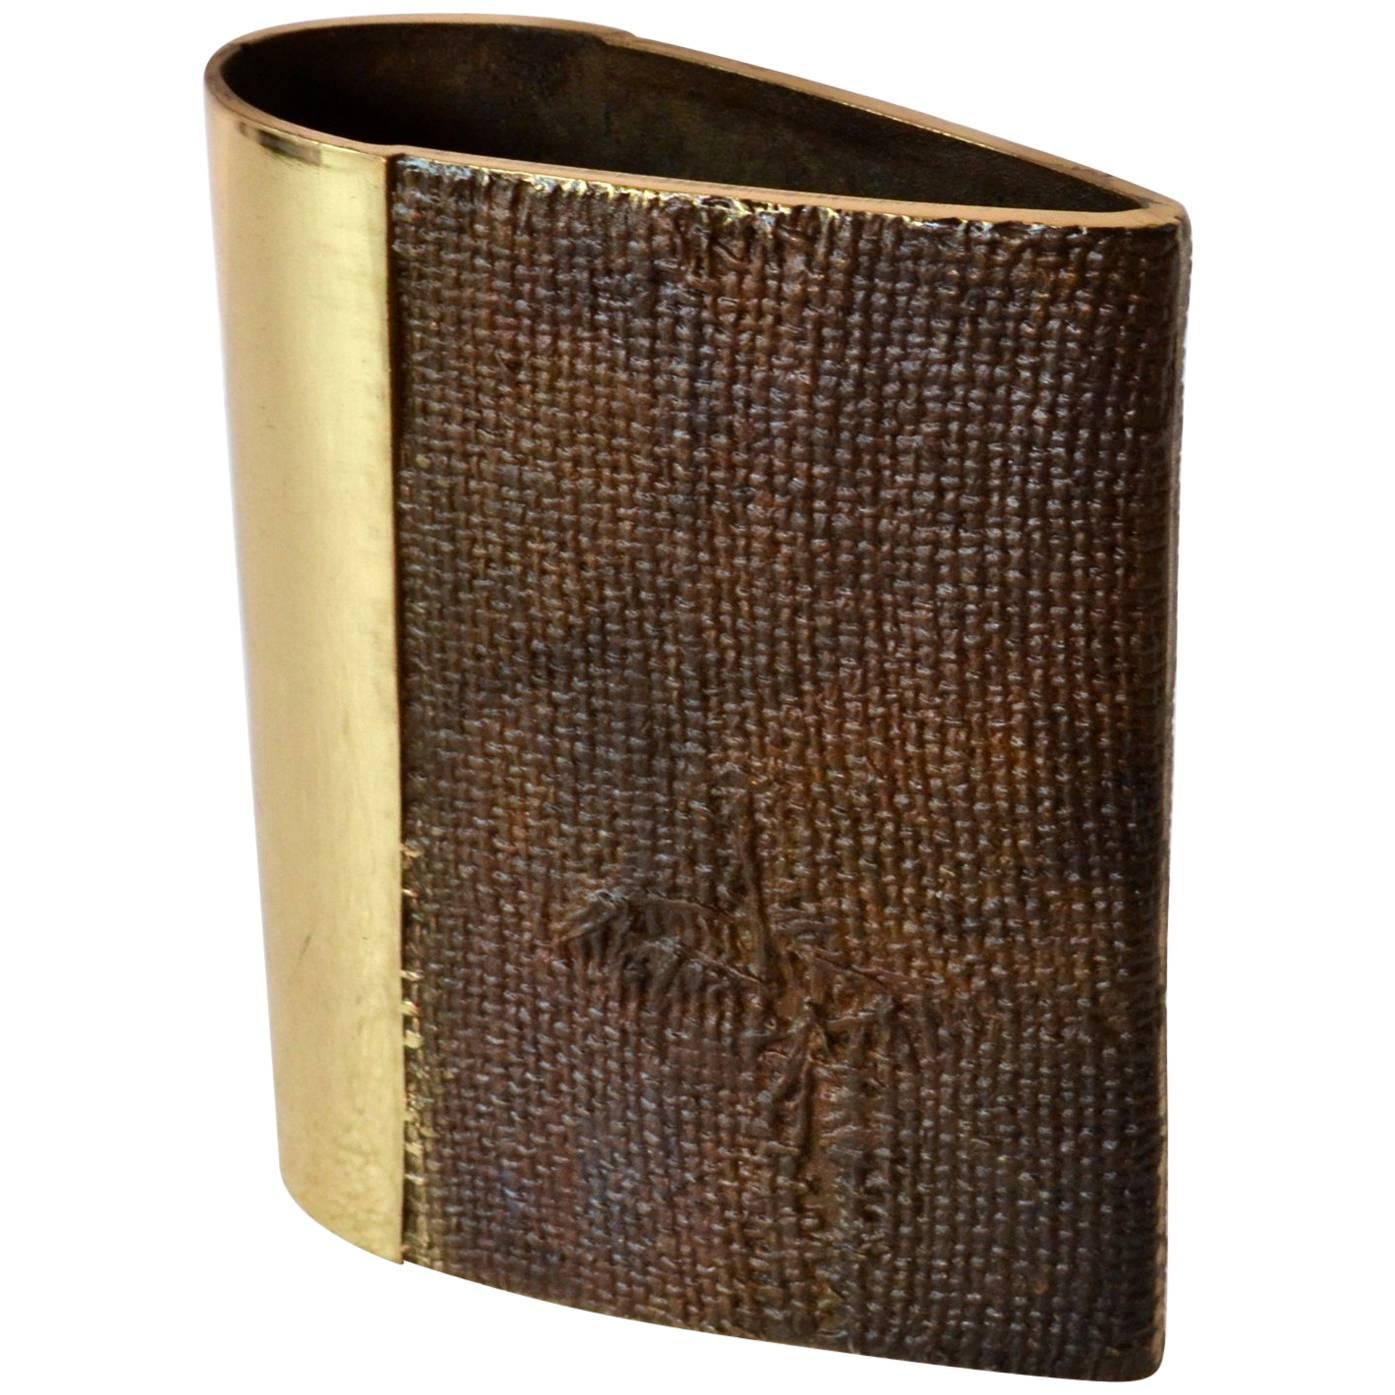 Brutalist Bronze Cast Vase by Saviato in Teardrop Shape with Textural Finish